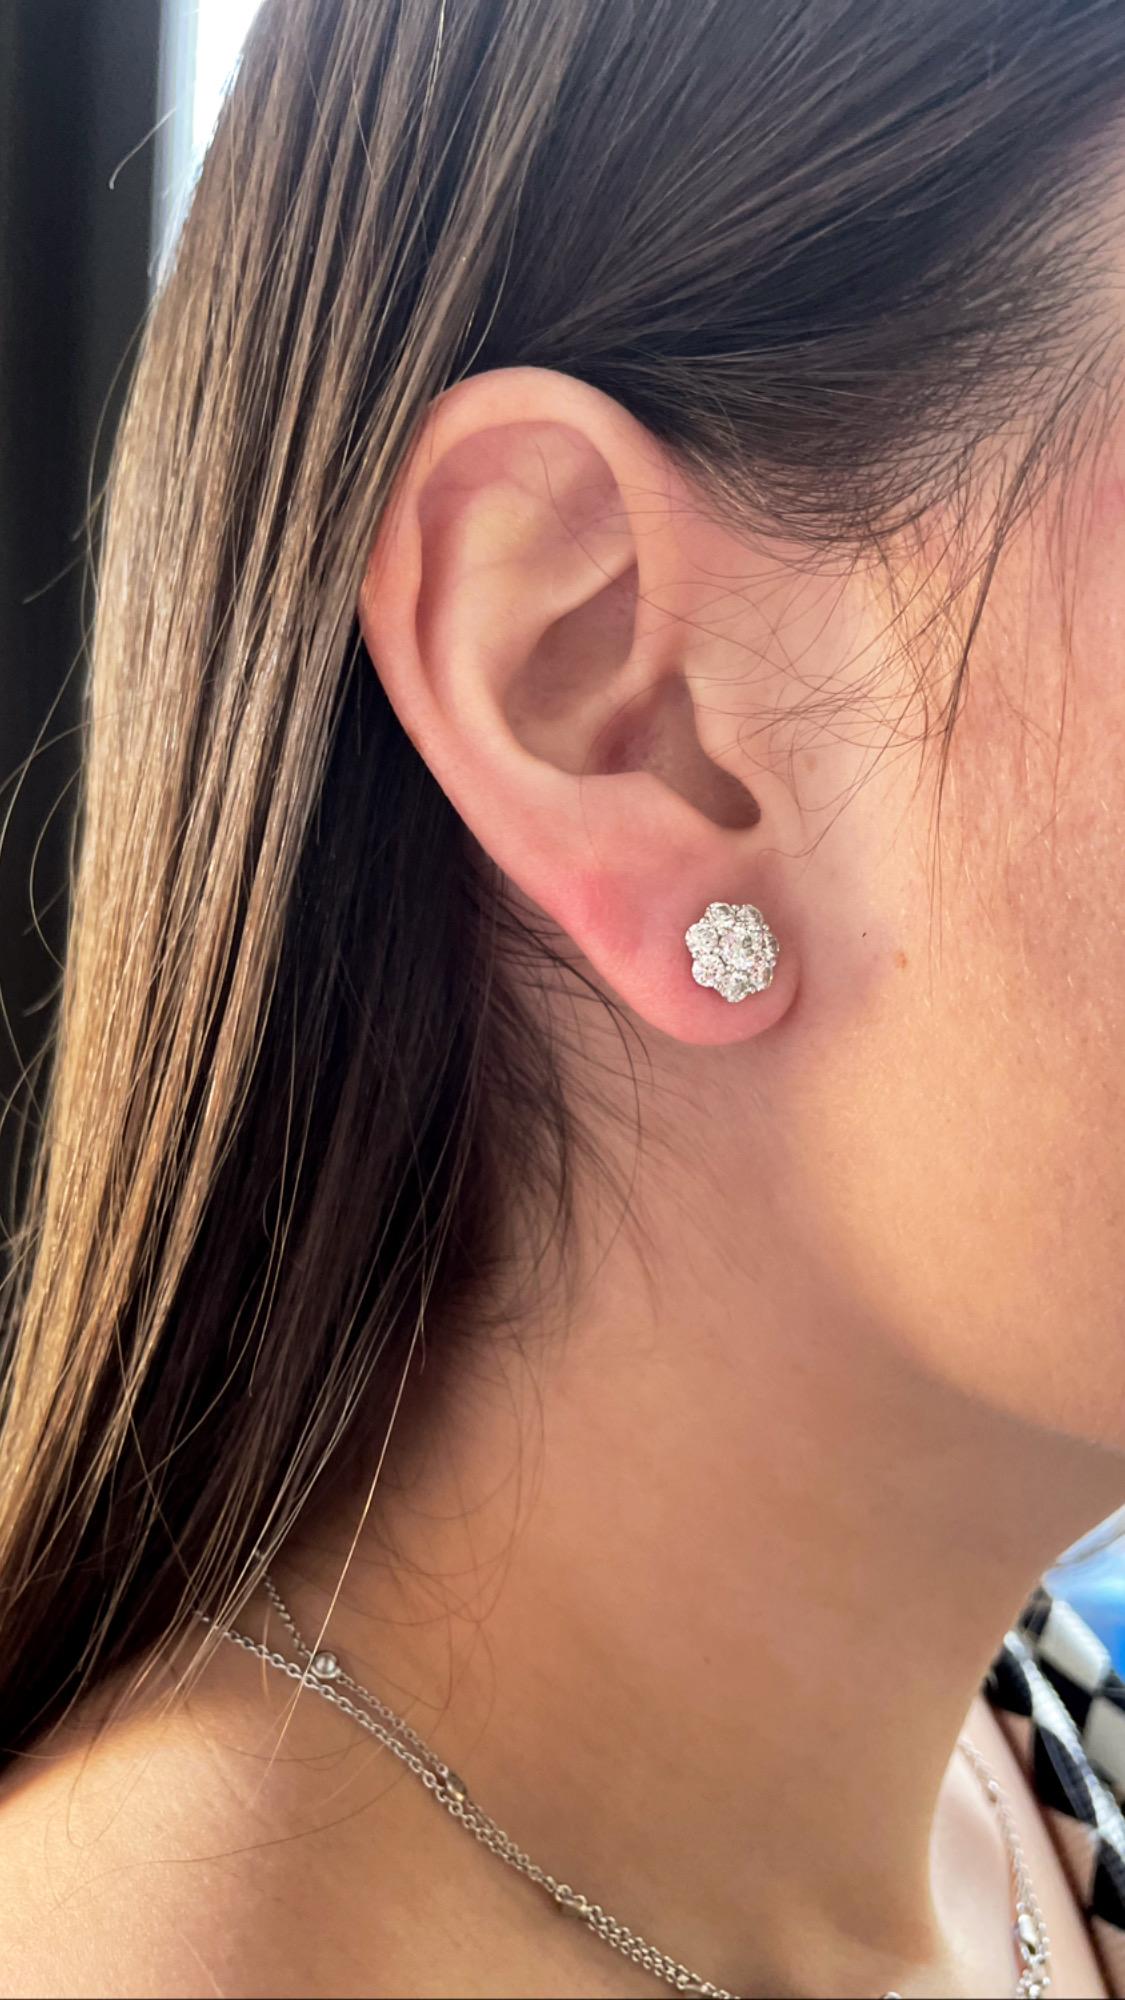 These sweet earrings by J. Birnbach are a beautiful staple jewelry piece. Crafted in 18 karat white gold, H color and VS clarity round diamonds sparkle in a classic floral shape. The diamonds total 2.10 carats. This size and style is wearable for